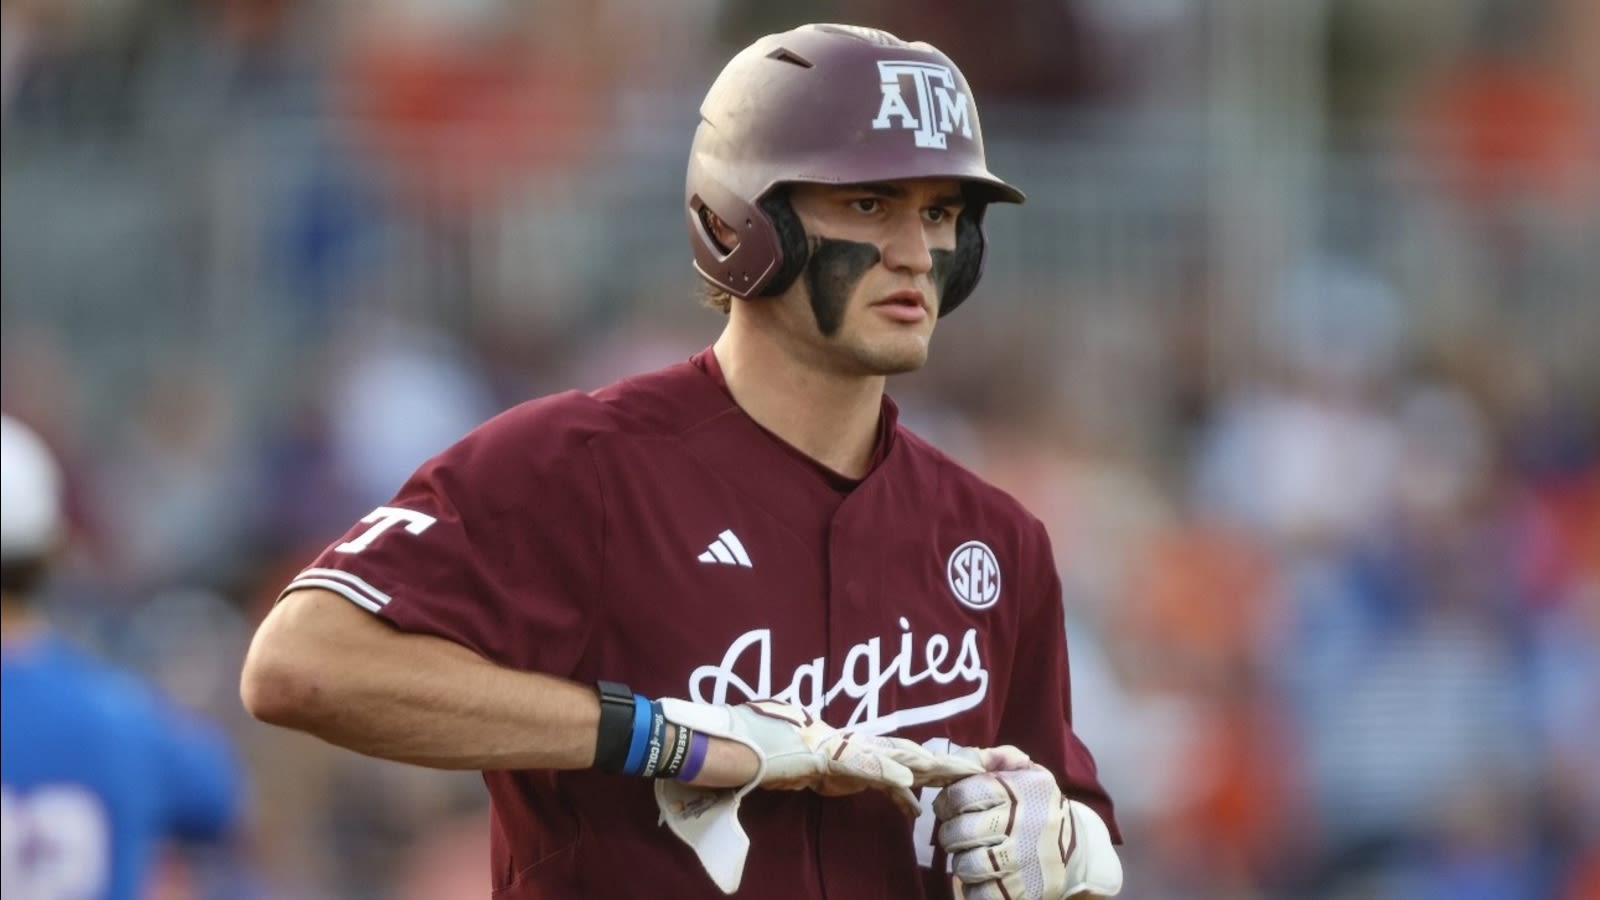 Texas A&M inches closer to Men's College World Series title after dropping Kentucky